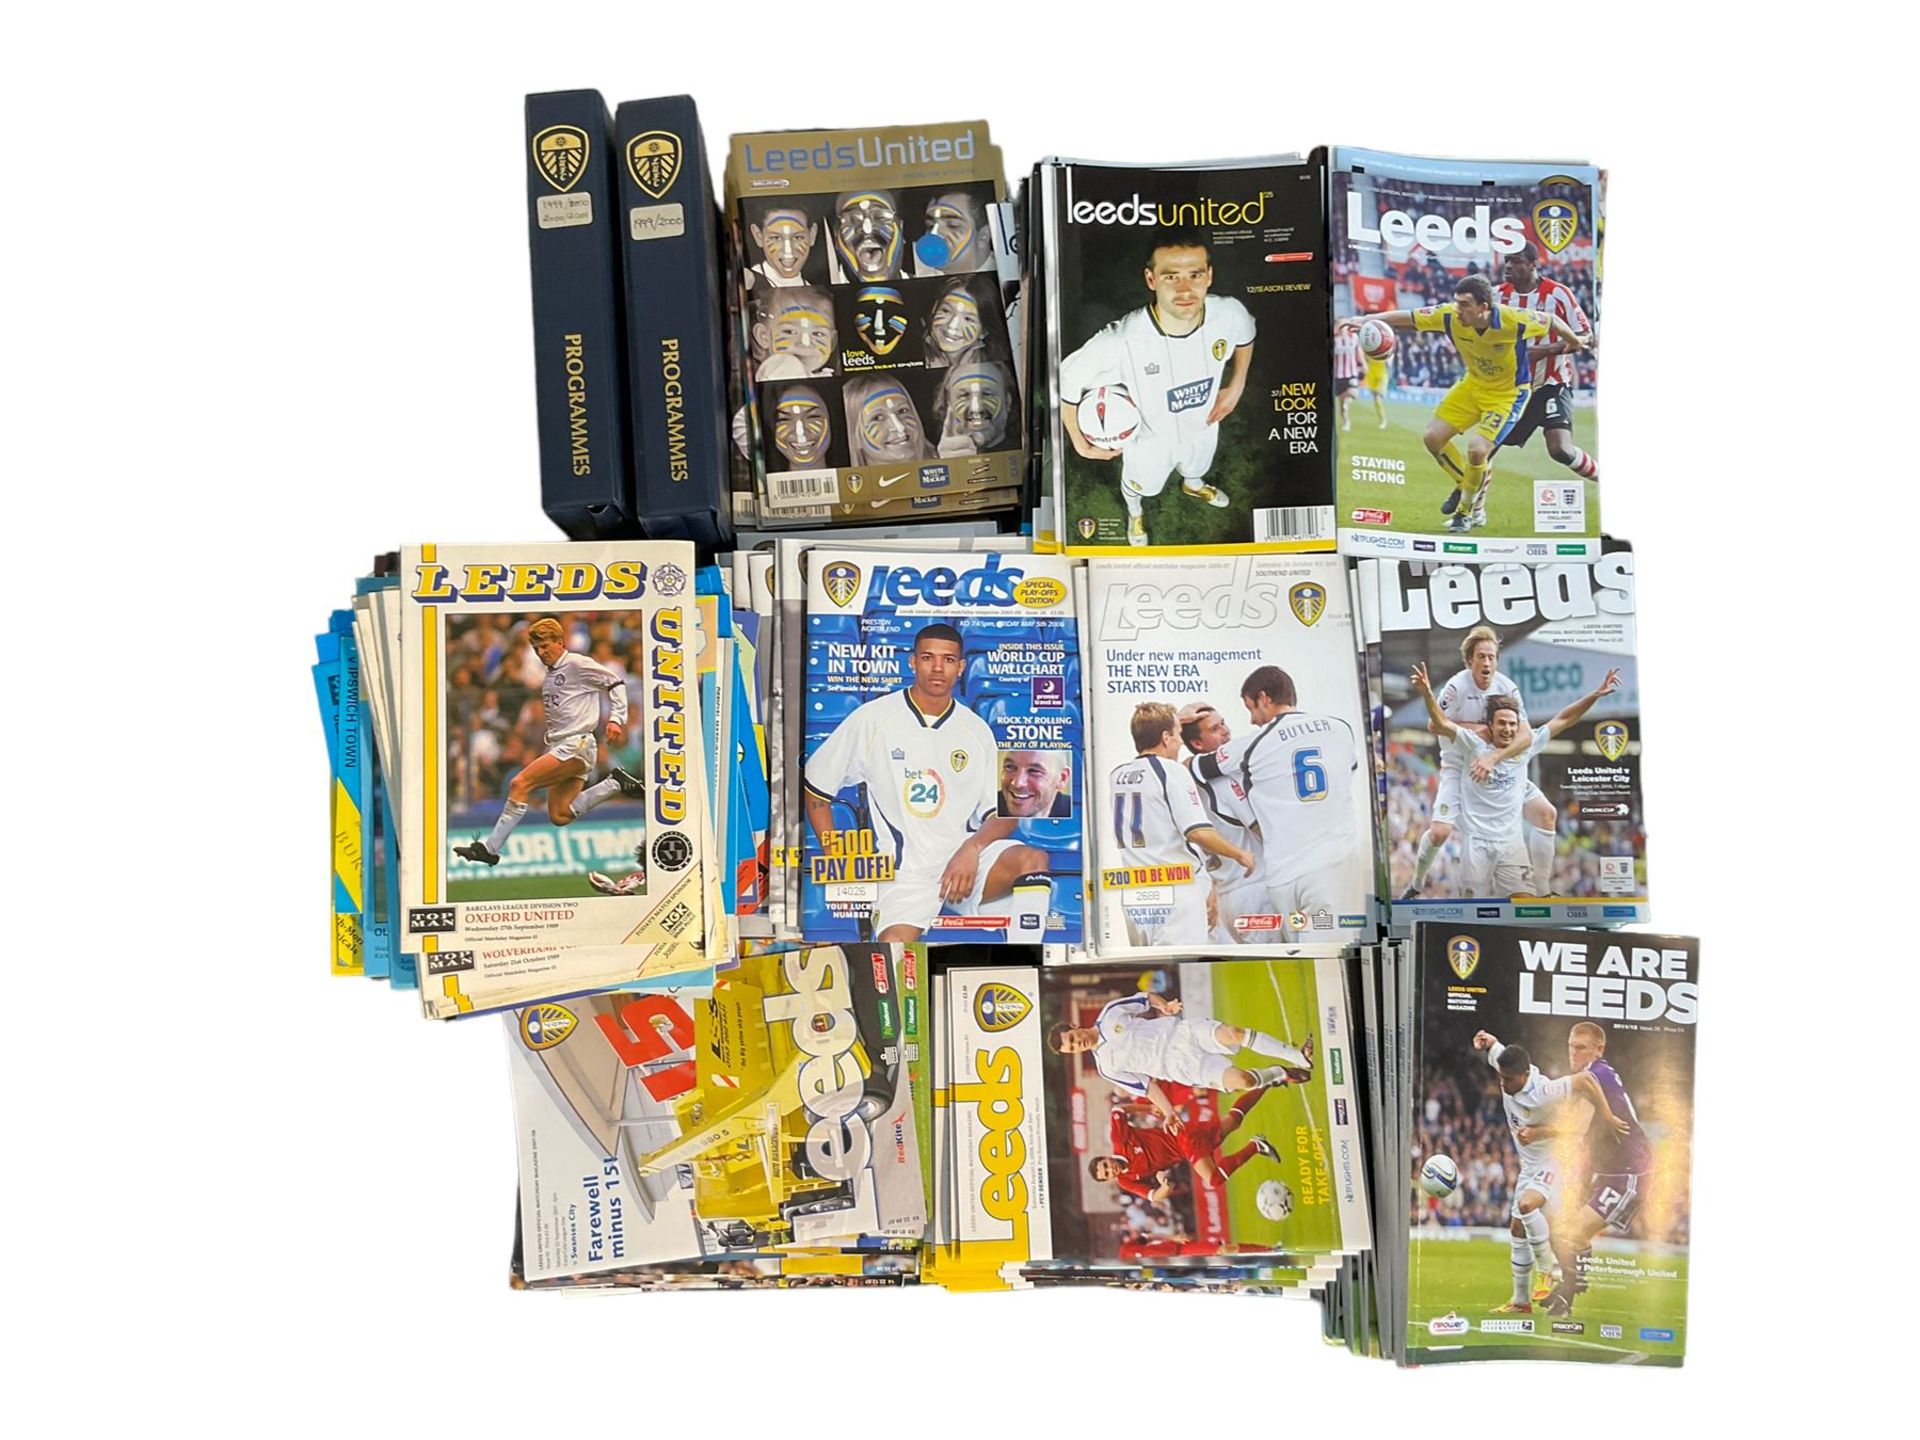 Leeds United football club - over three-hundred home game programmes including